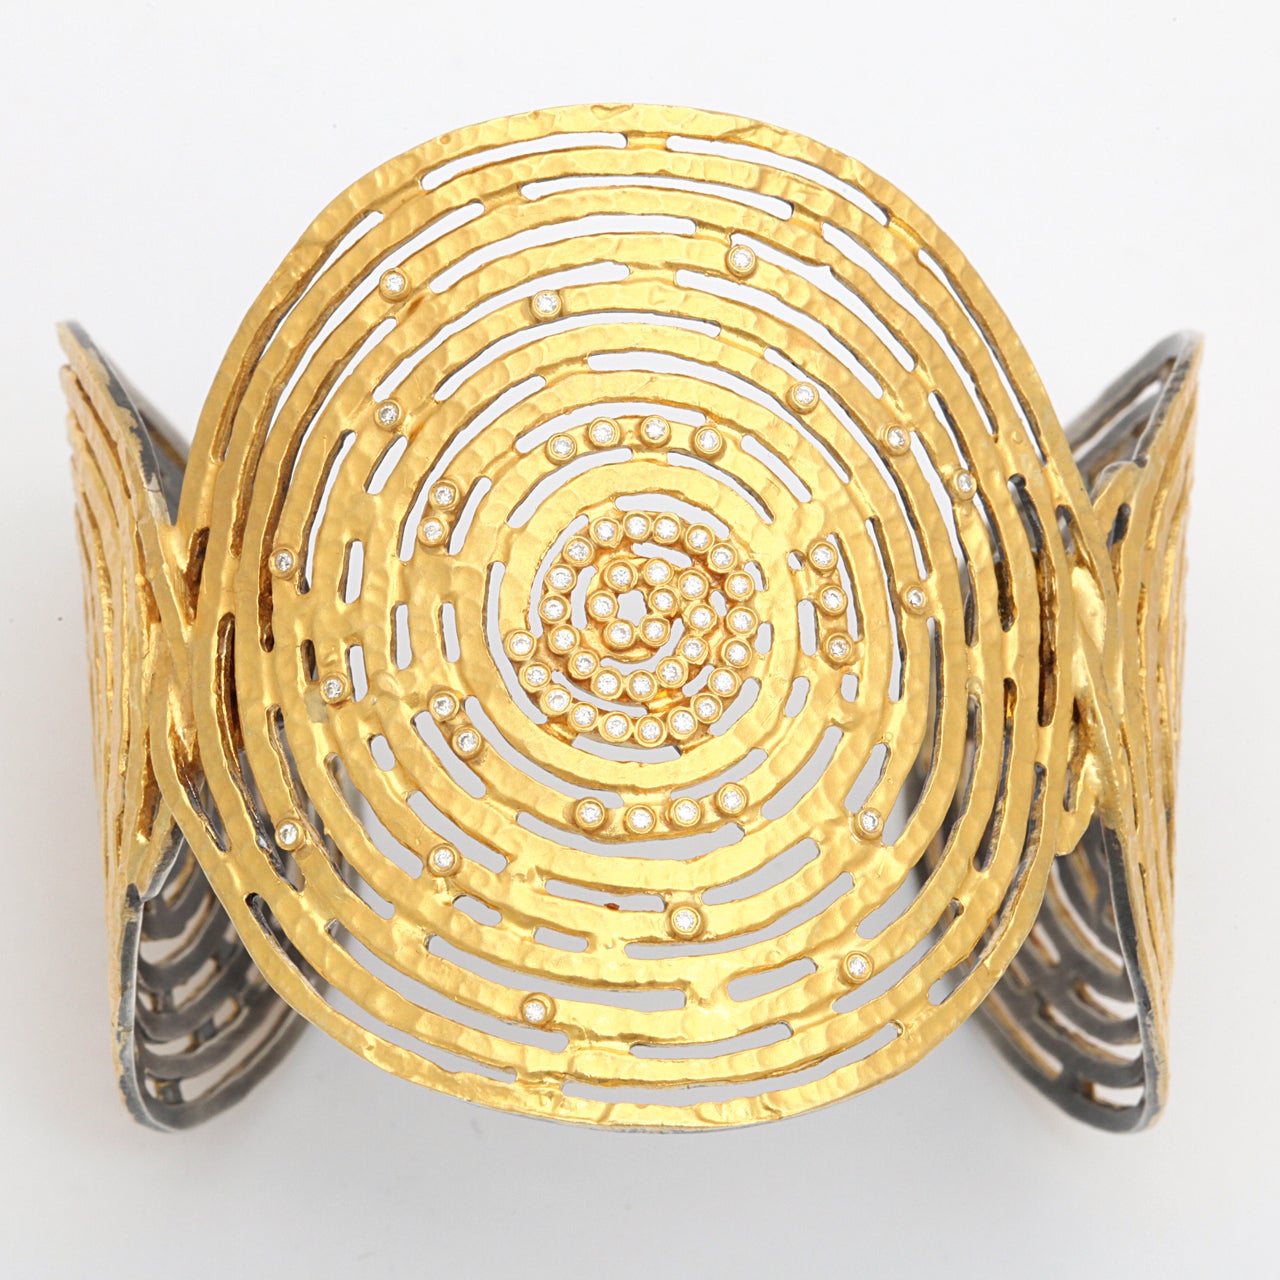 sterling silver, 24k yellow gold, 18K gold & diamond concentric circle design cuff bracelet